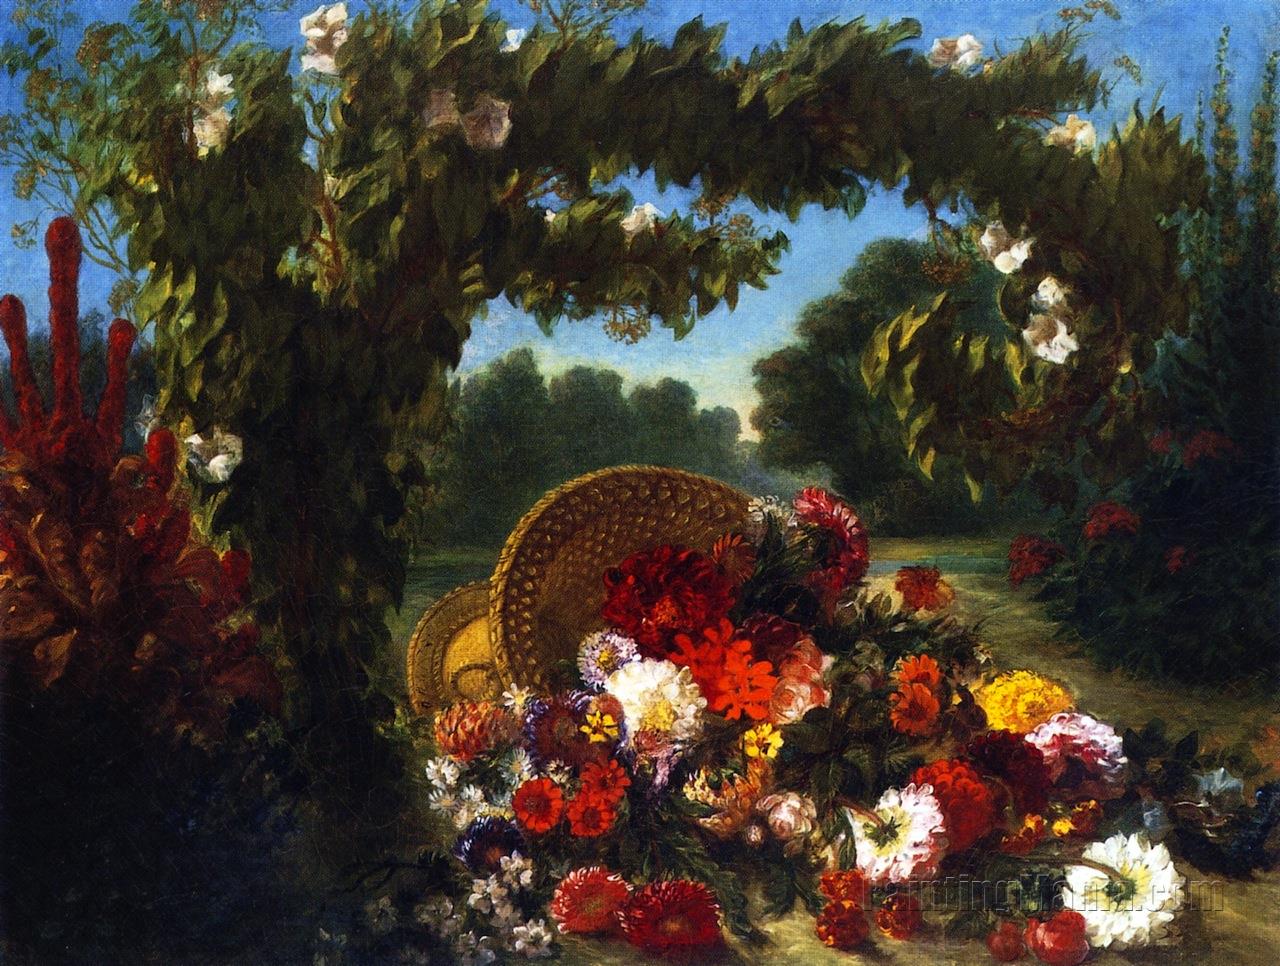 A Basket of Flowers Overturned in a Park